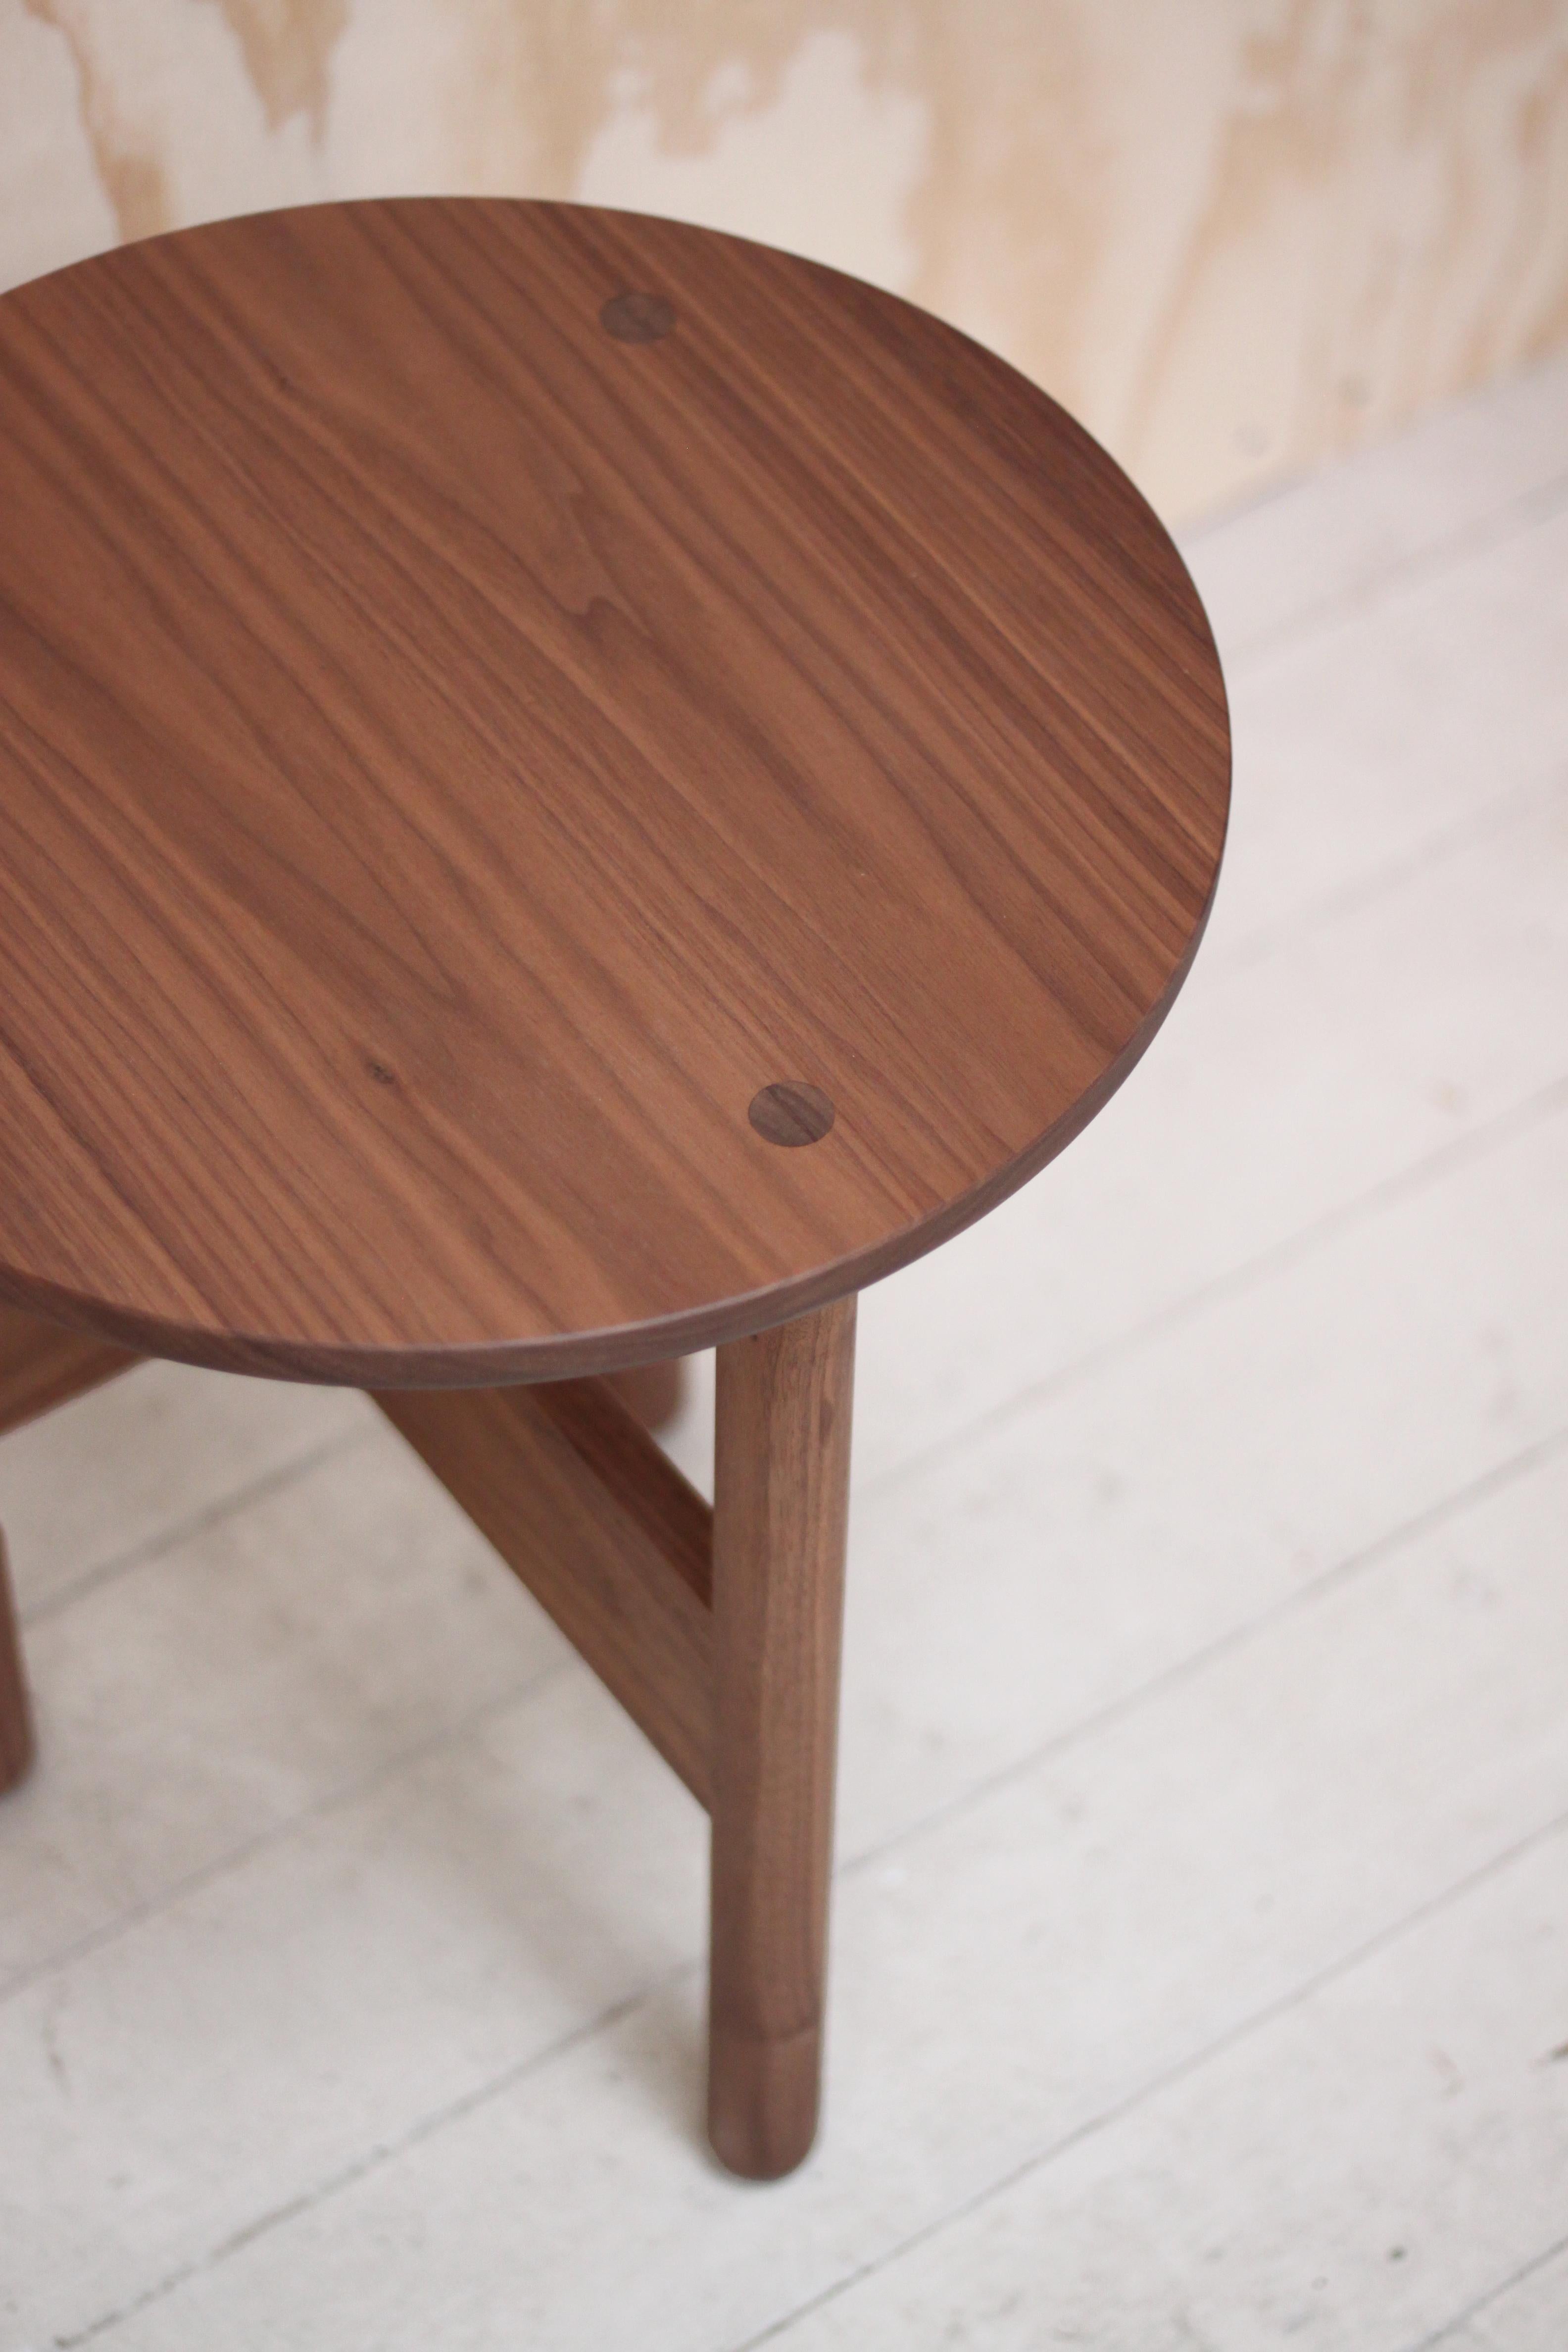 Hand-Crafted Handmade Hanne Side Table Ø45cm - Walnut - by BACD studio For Sale